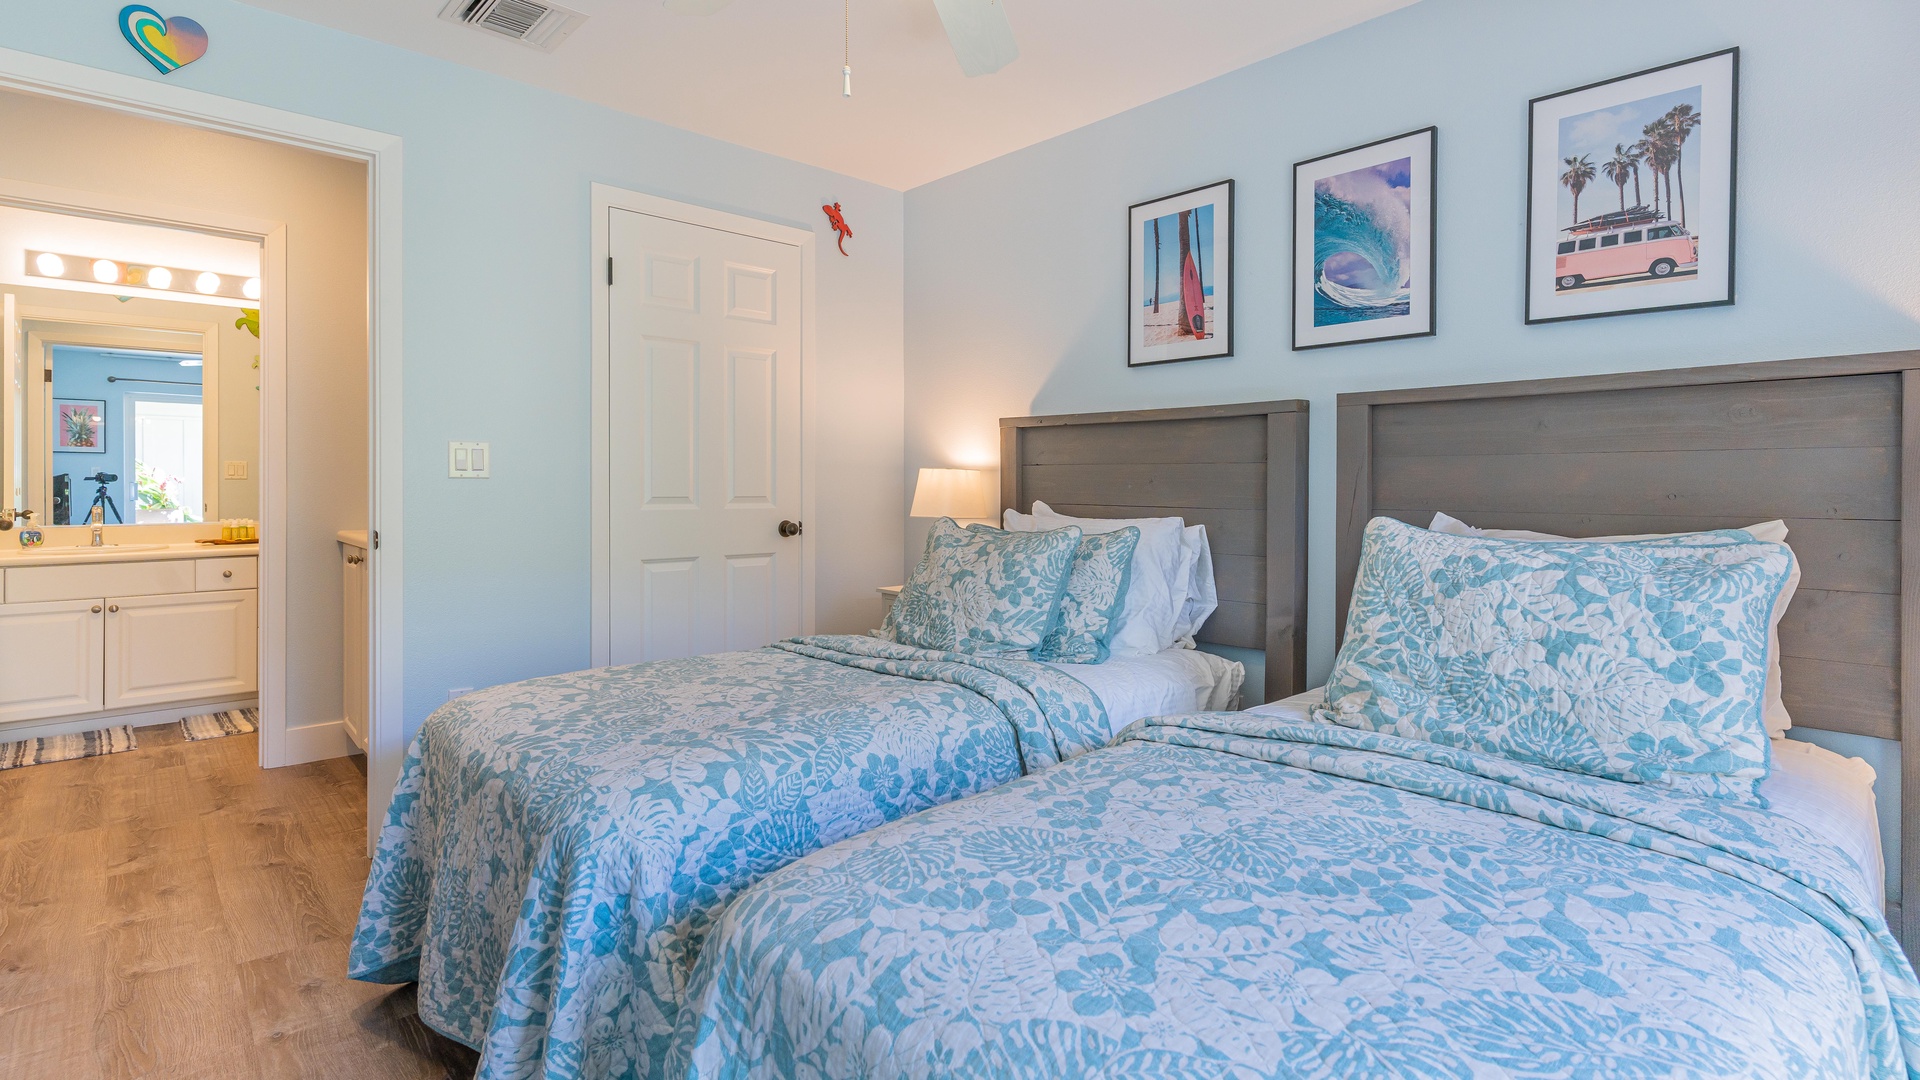 Kapolei Vacation Rentals, Coconut Plantation 1214-2 Aloha Lagoons - The second guest bedroom decorated in peaceful ocean blues.